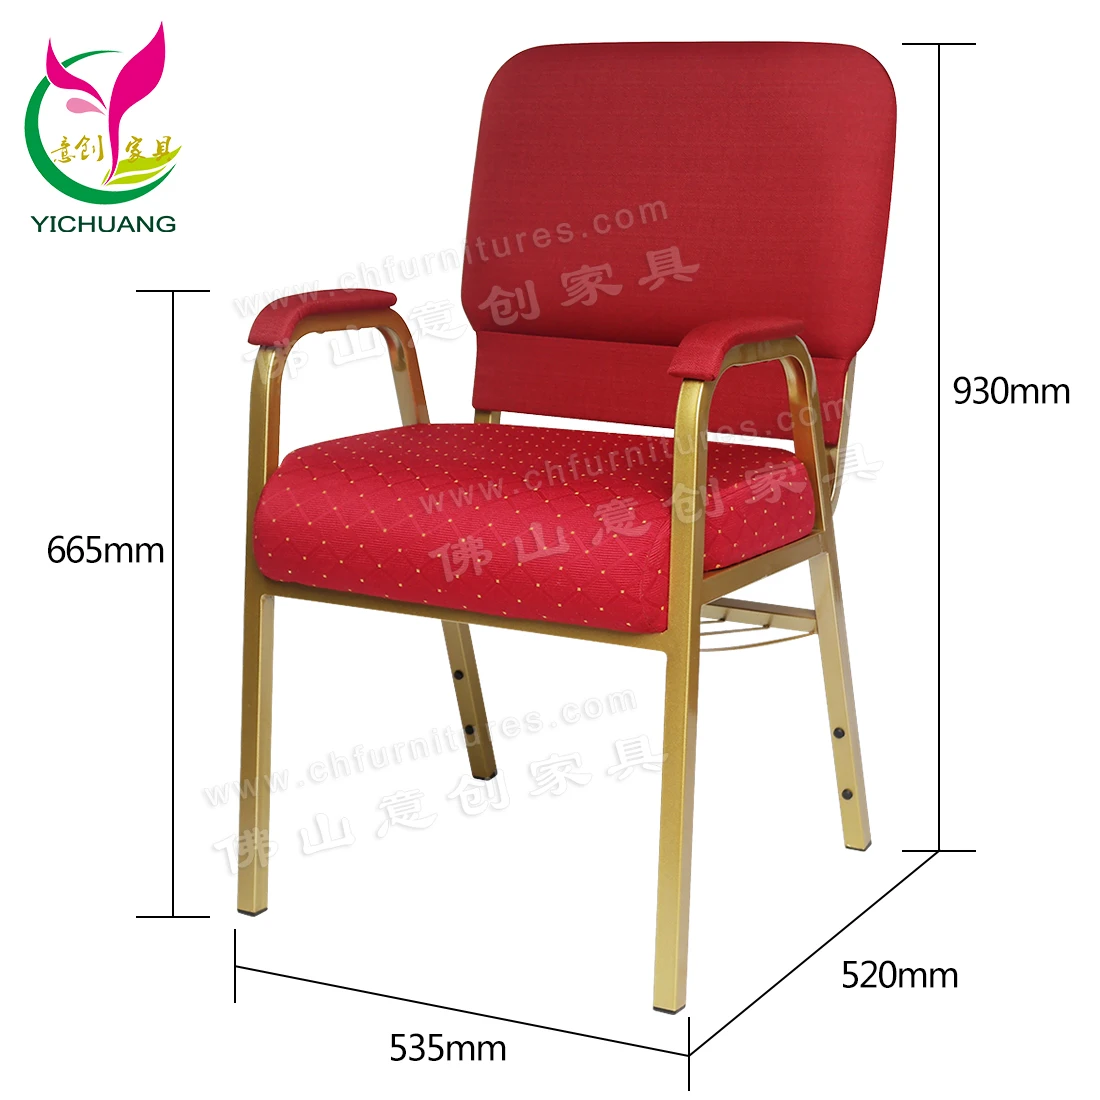 Cheap Stacking Armrest Church Steel Chair Upholstered Red Auditorium Church Chairs With Bookshelves Buy Church Chairs